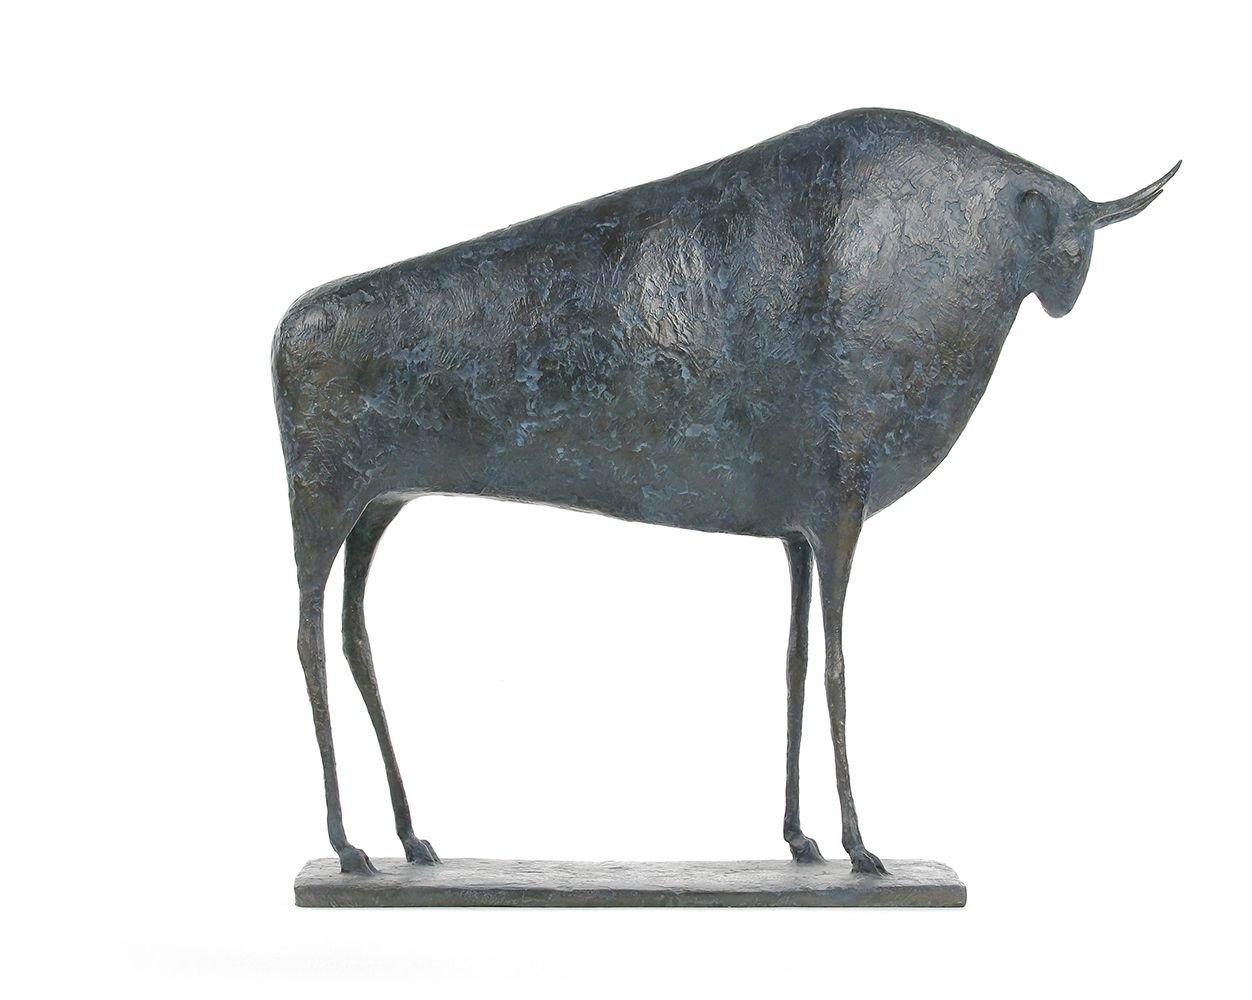 Bull VI (Taureau VI) by French contemporary artist Pierre Yermia. Bronze sculpture, 54 × 47 × 15 cm.
Signed and numbered. Limited edition of 8 copies and 4 artist's proofs.
"The bull is the only masculine animal in my bestiary. His silent and serene